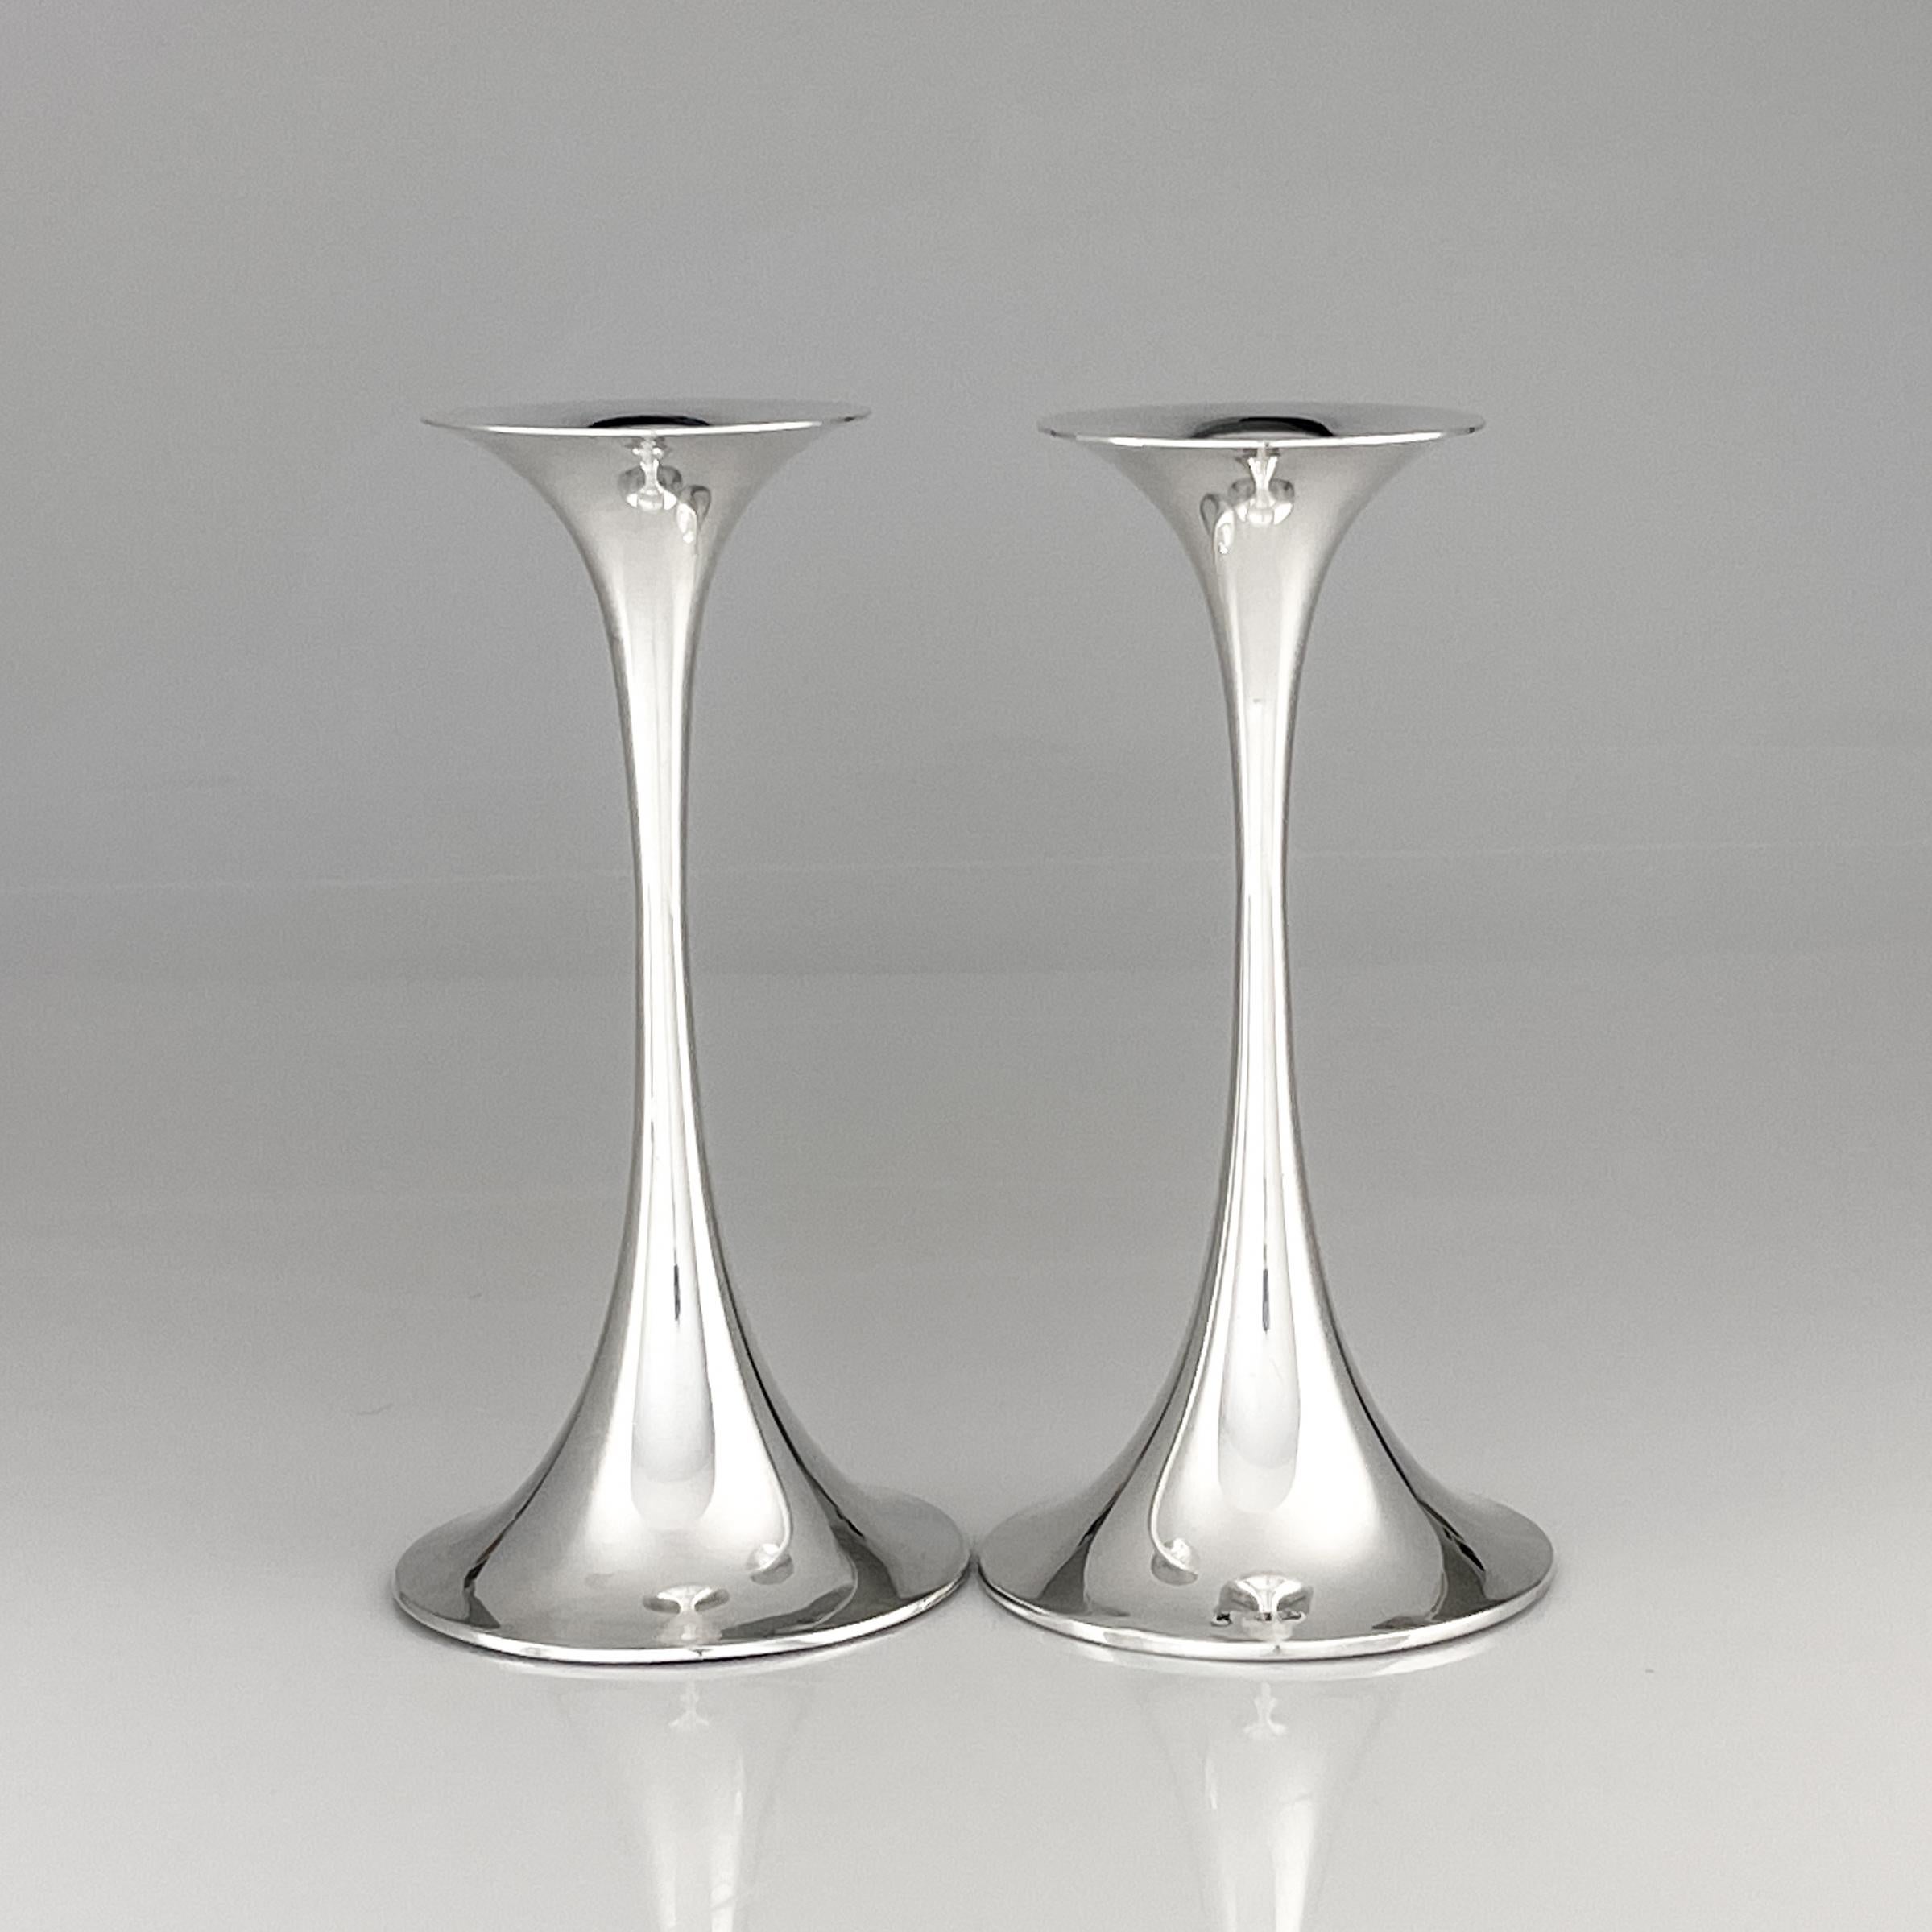 Tapio Wirkkala Scandinavian modern silver Trumpetti candlesticks Finland 1970's

A pair of Sterling silver “Trumpetti” candlesticks, model TW 284. Designed by Tapio Wirkkala in 1963 and executed by the craftsmen of Kultakeskus in the 1970’s.

This